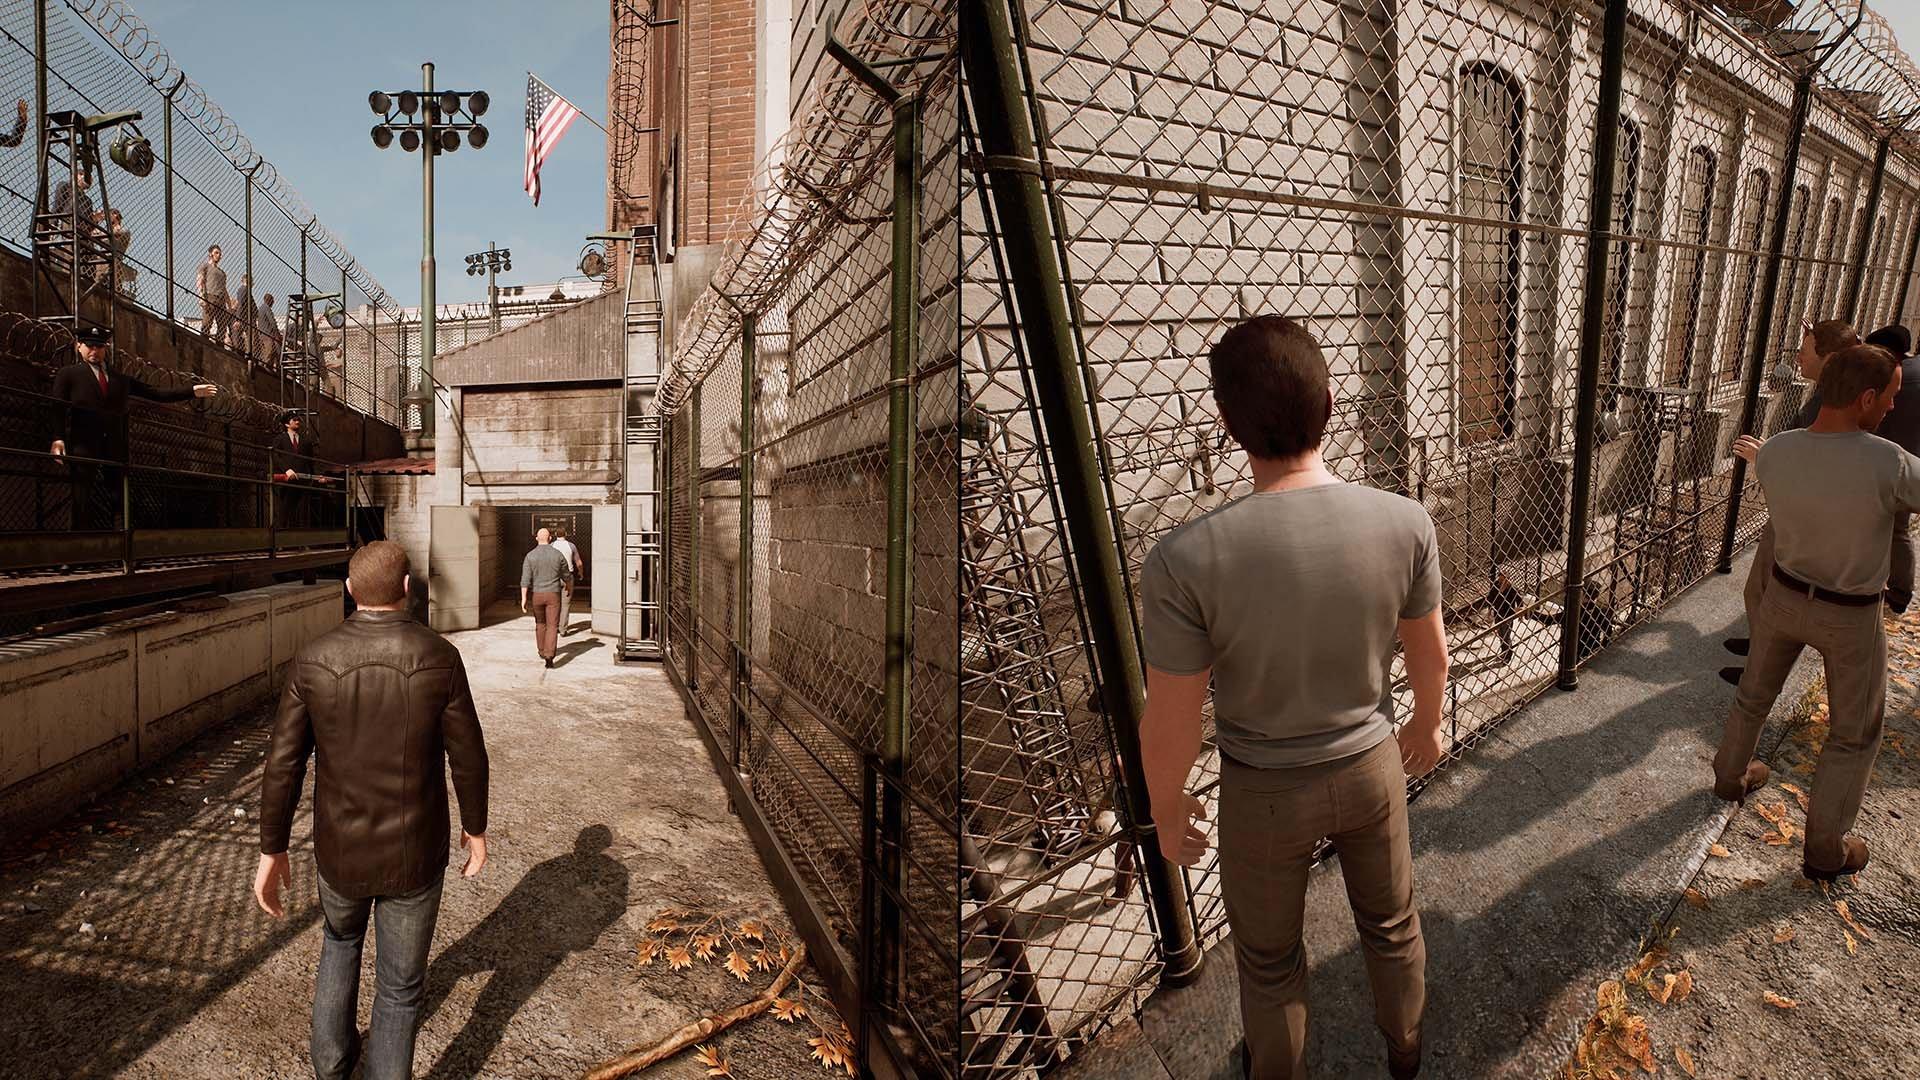 a way out nintendo switch